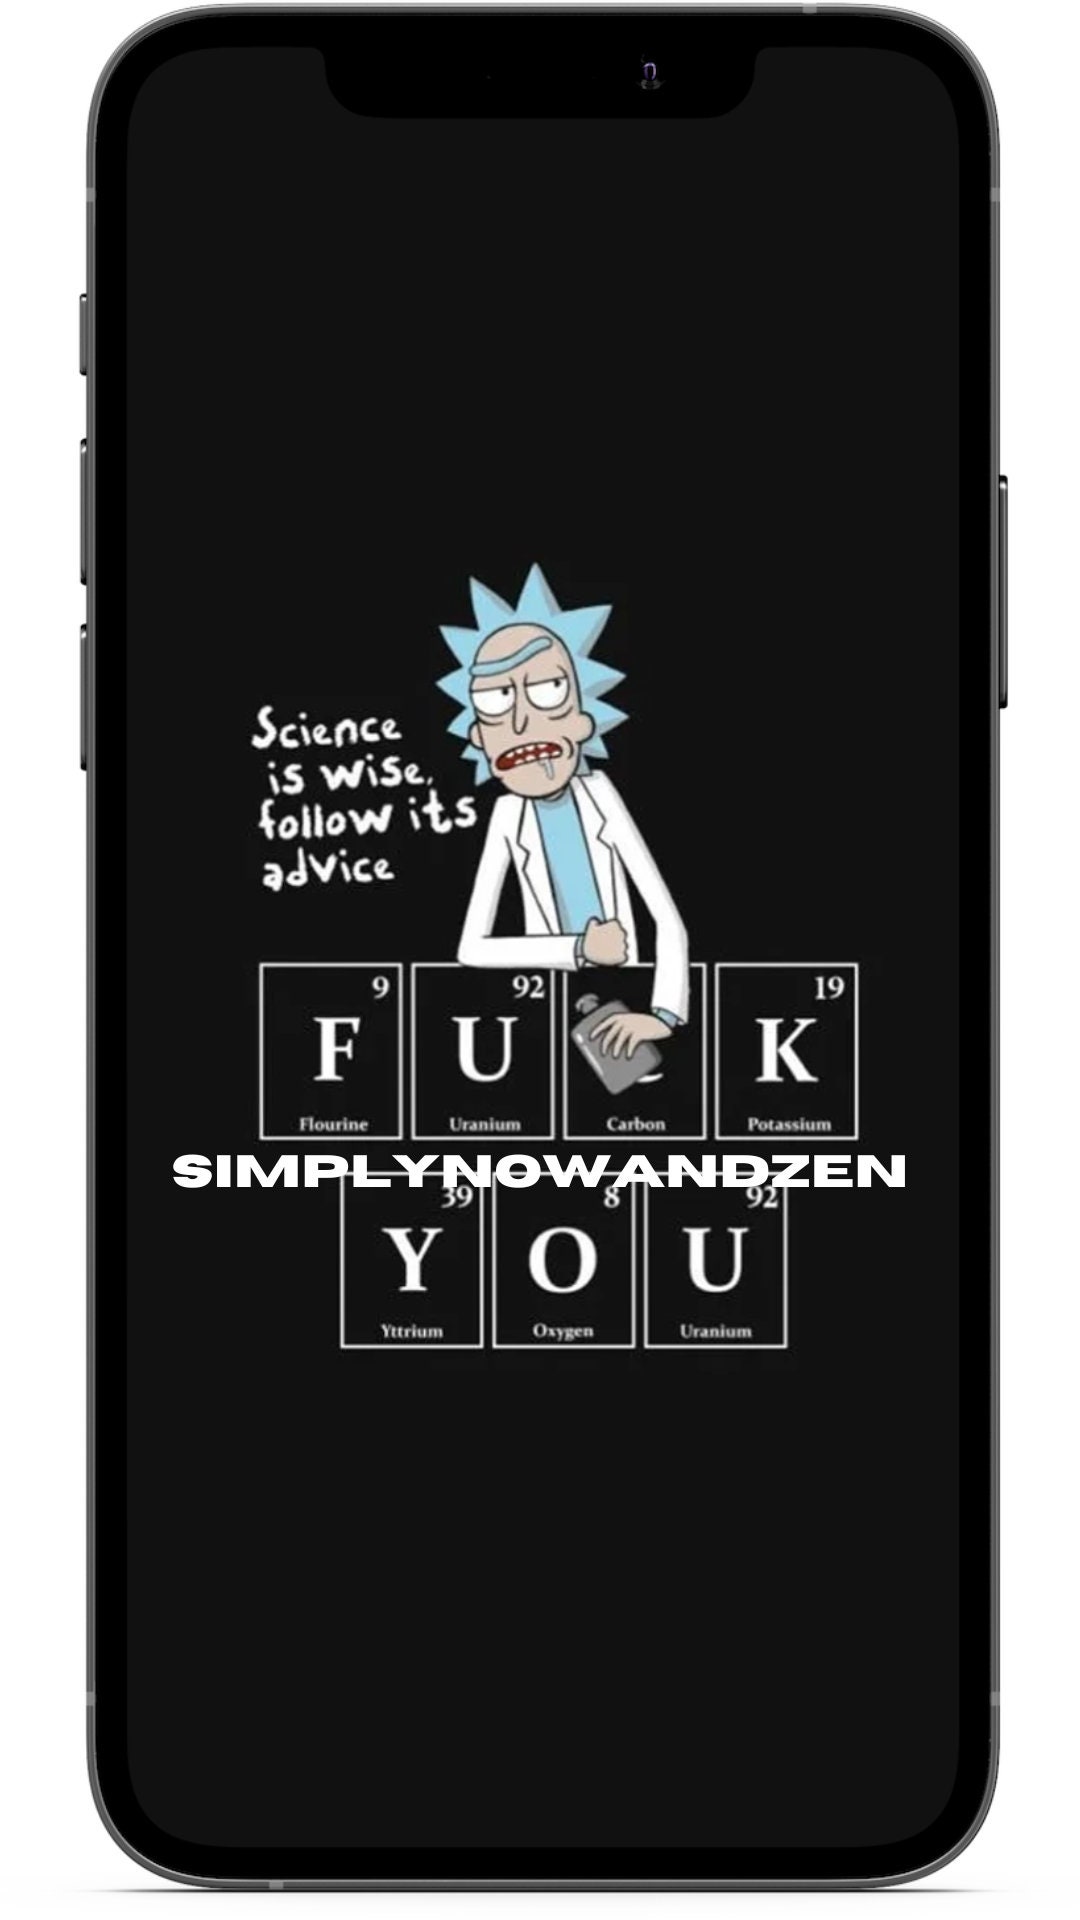 Cool Rick and Morty iPhone Wallpaper, Black Dark Wallpaper, Fun Moody  Wallpaper, Android Ios Aesthetic, iPad Theme, Removable Background PNG -   Israel